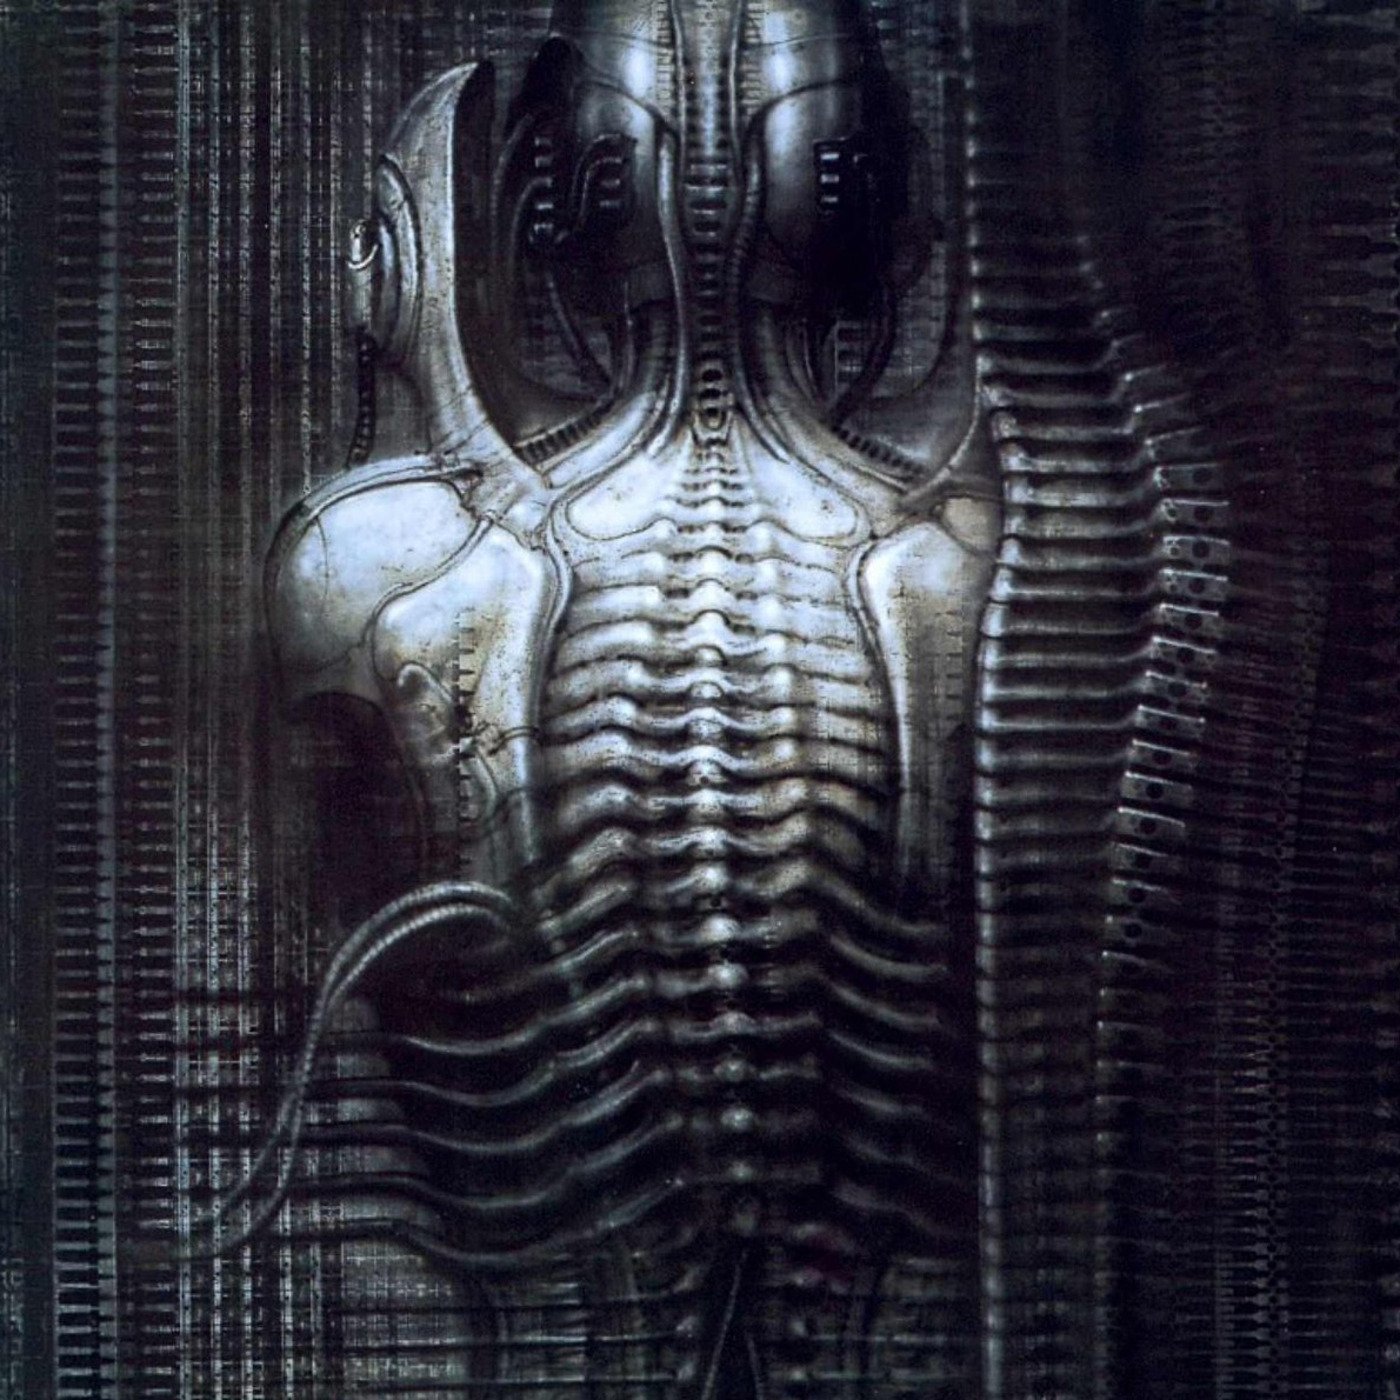 The Giger Mix